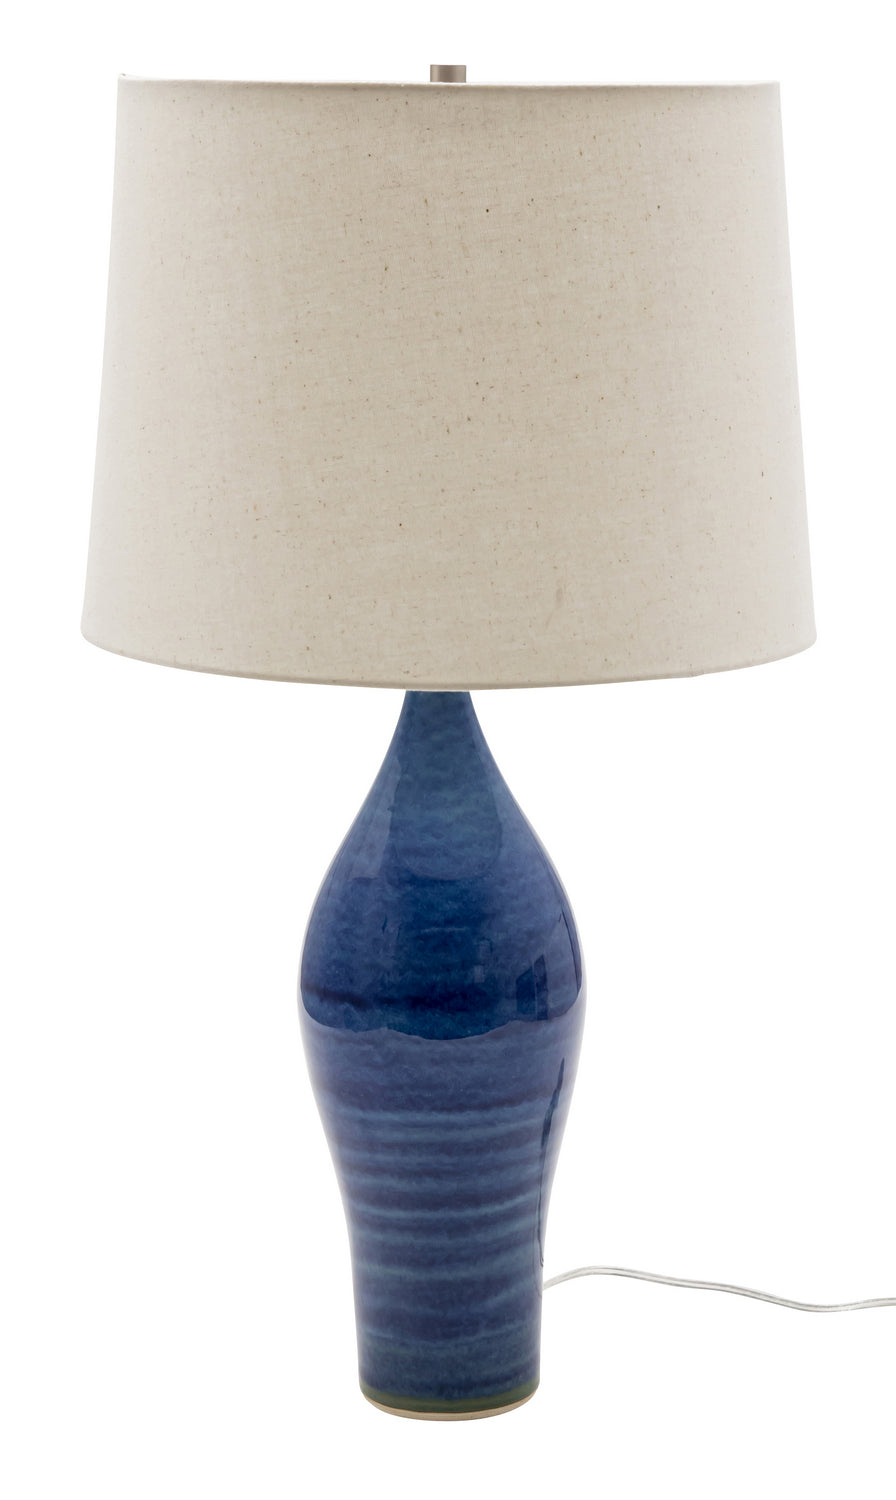 27 Inch Scatchard Table Lamp in Blue Gloss with Off White Linen Hardback